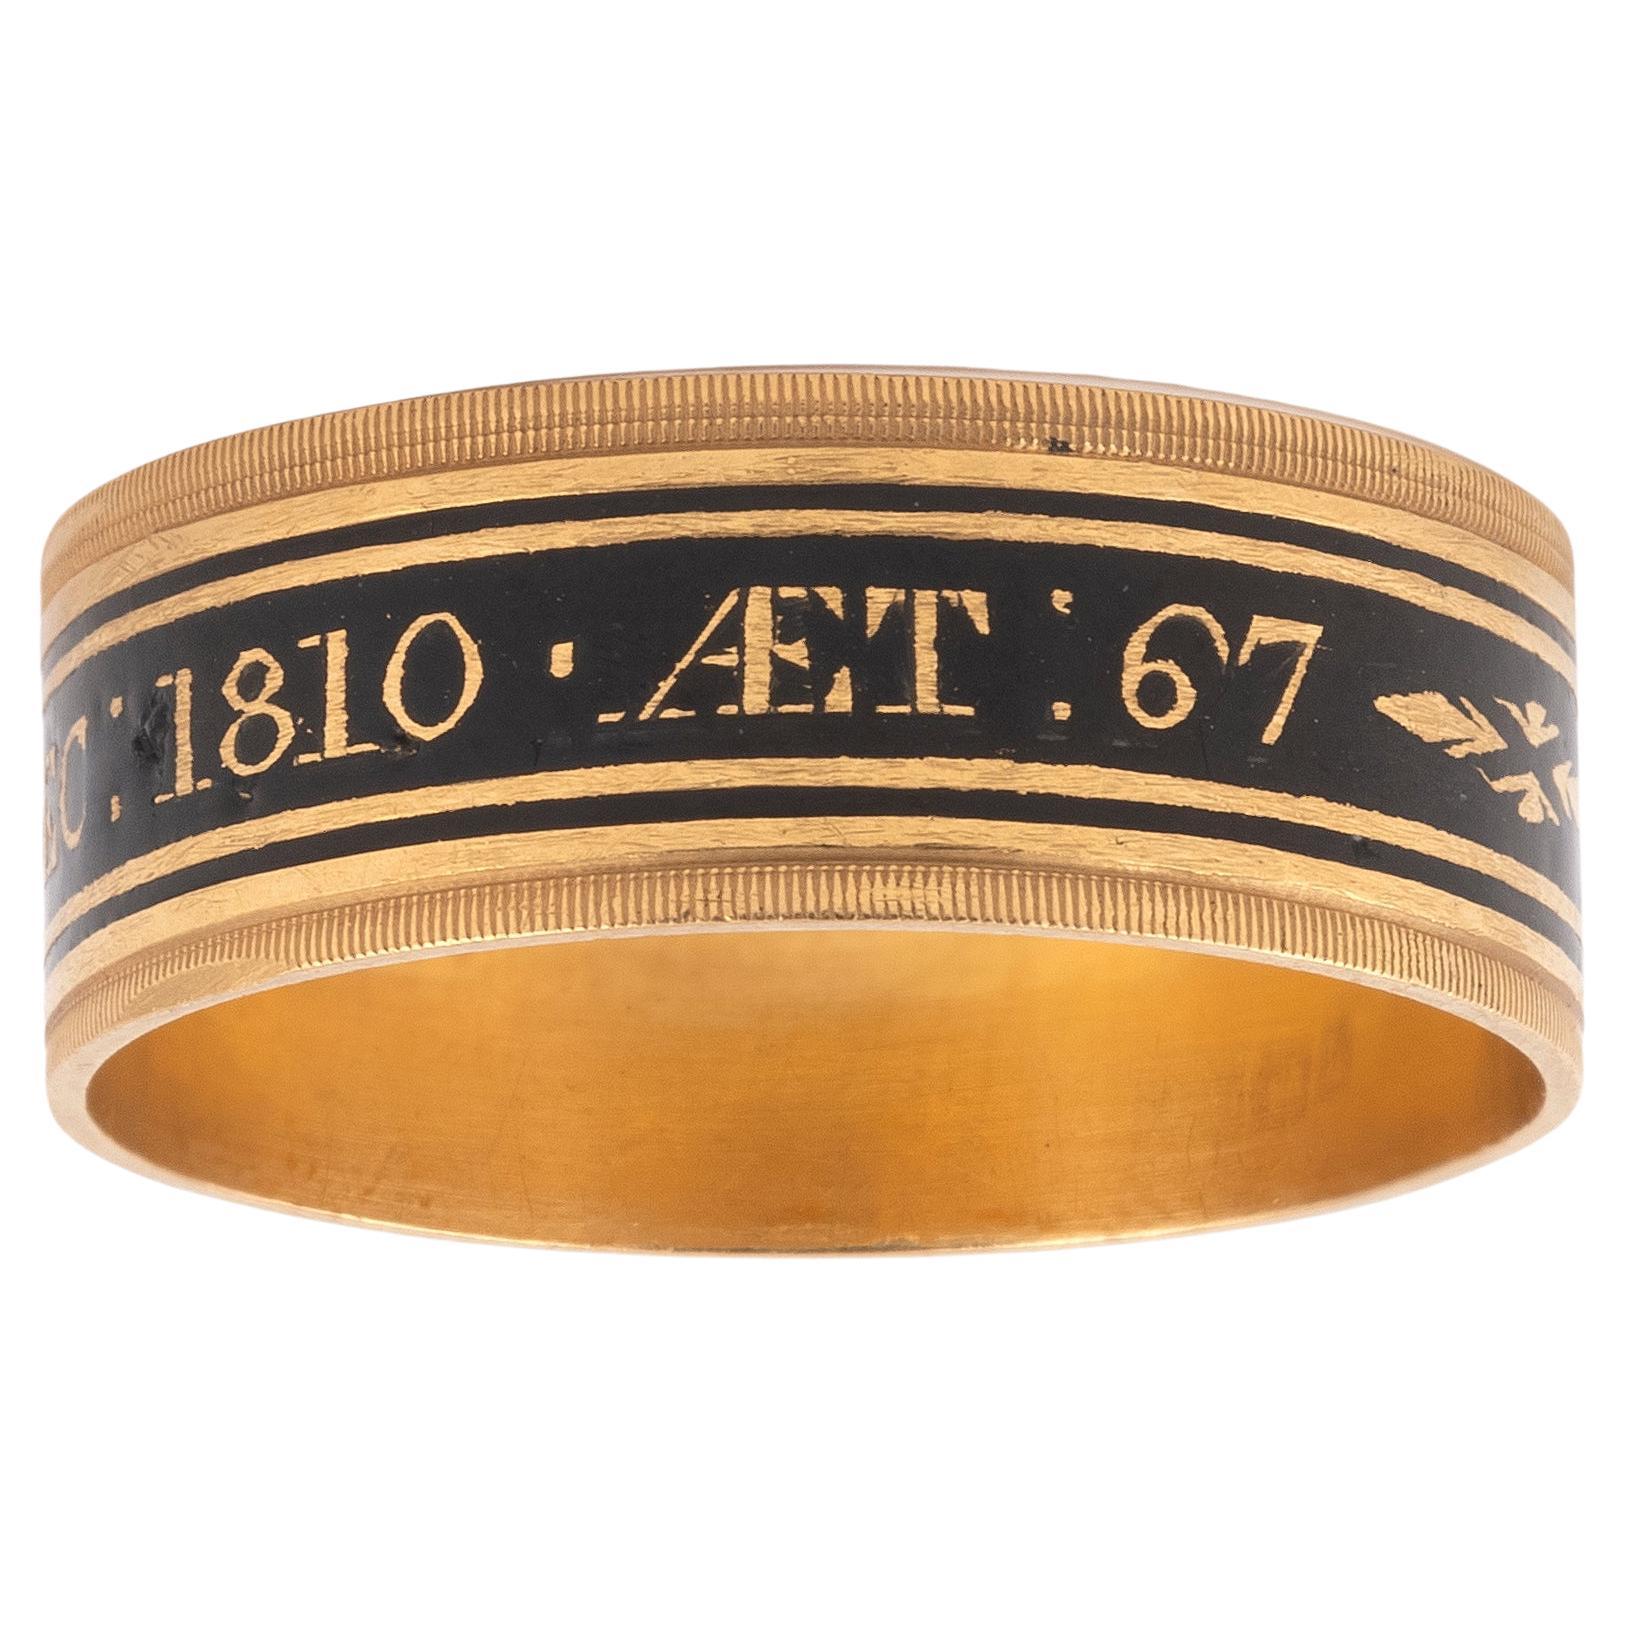 Mourning ring, 19th century, probably Matthew Govett, created rings of this style in gold for a range of people in society., circumferential black inscription band with date 1810, 4.75 g, Size 9

M: Milner, who died on the 22st of December, 1810, at